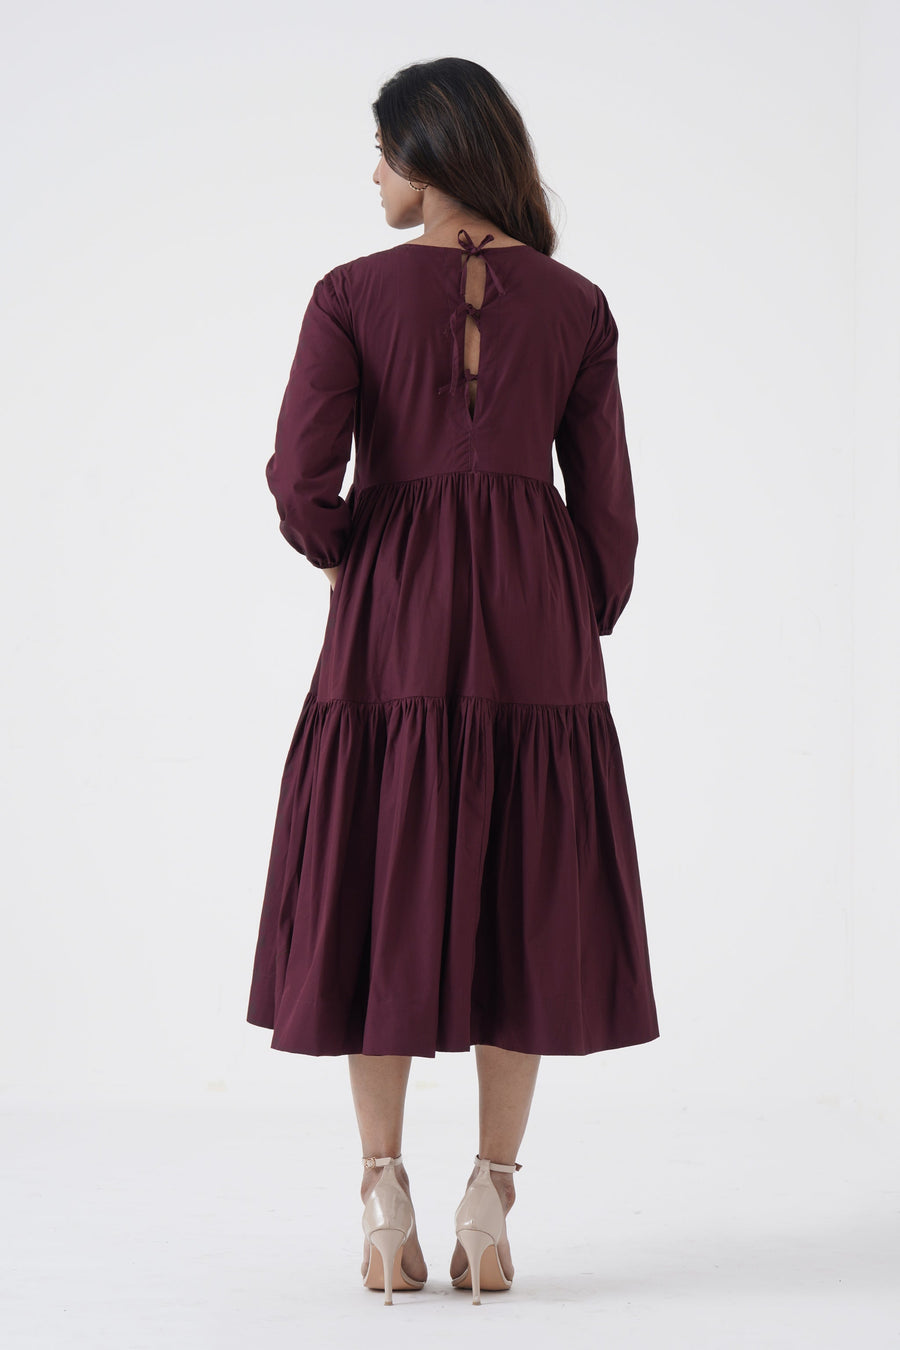 A Model Wearing Brown Pure Cotton Bustling Soul- Back strap Tier Dress- Wine, curated by Only Ethikal